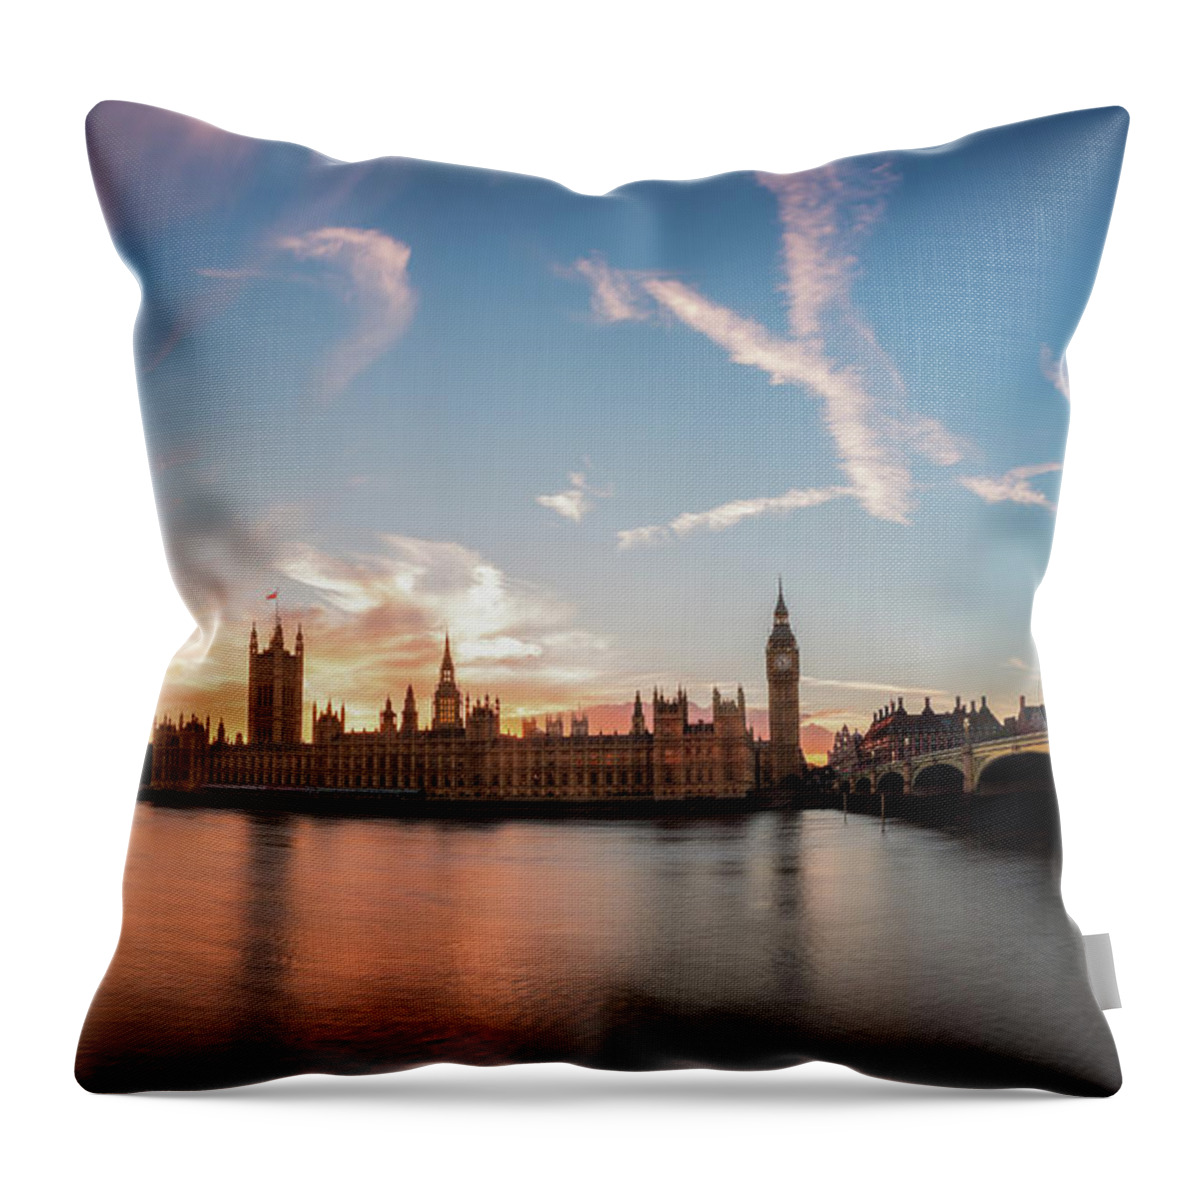 Arch Throw Pillow featuring the photograph Big Ben Sunset Panorama In London by Paul Wynn-mackenzie Photography